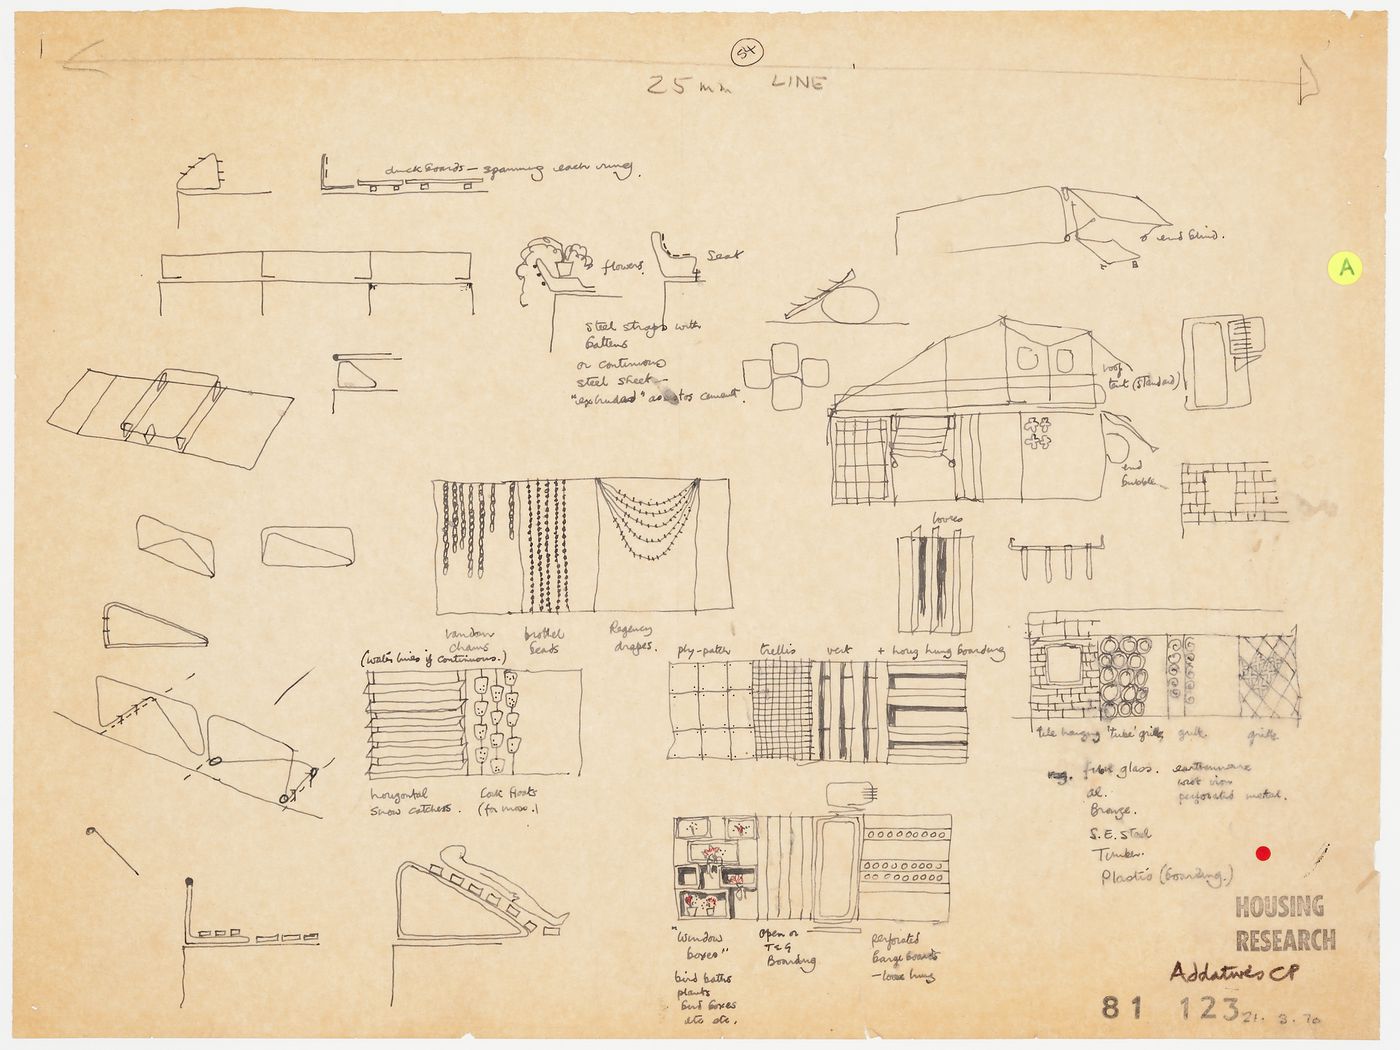 Housing Research: sketches of "addatives" (options for customising) for prefabricated houses